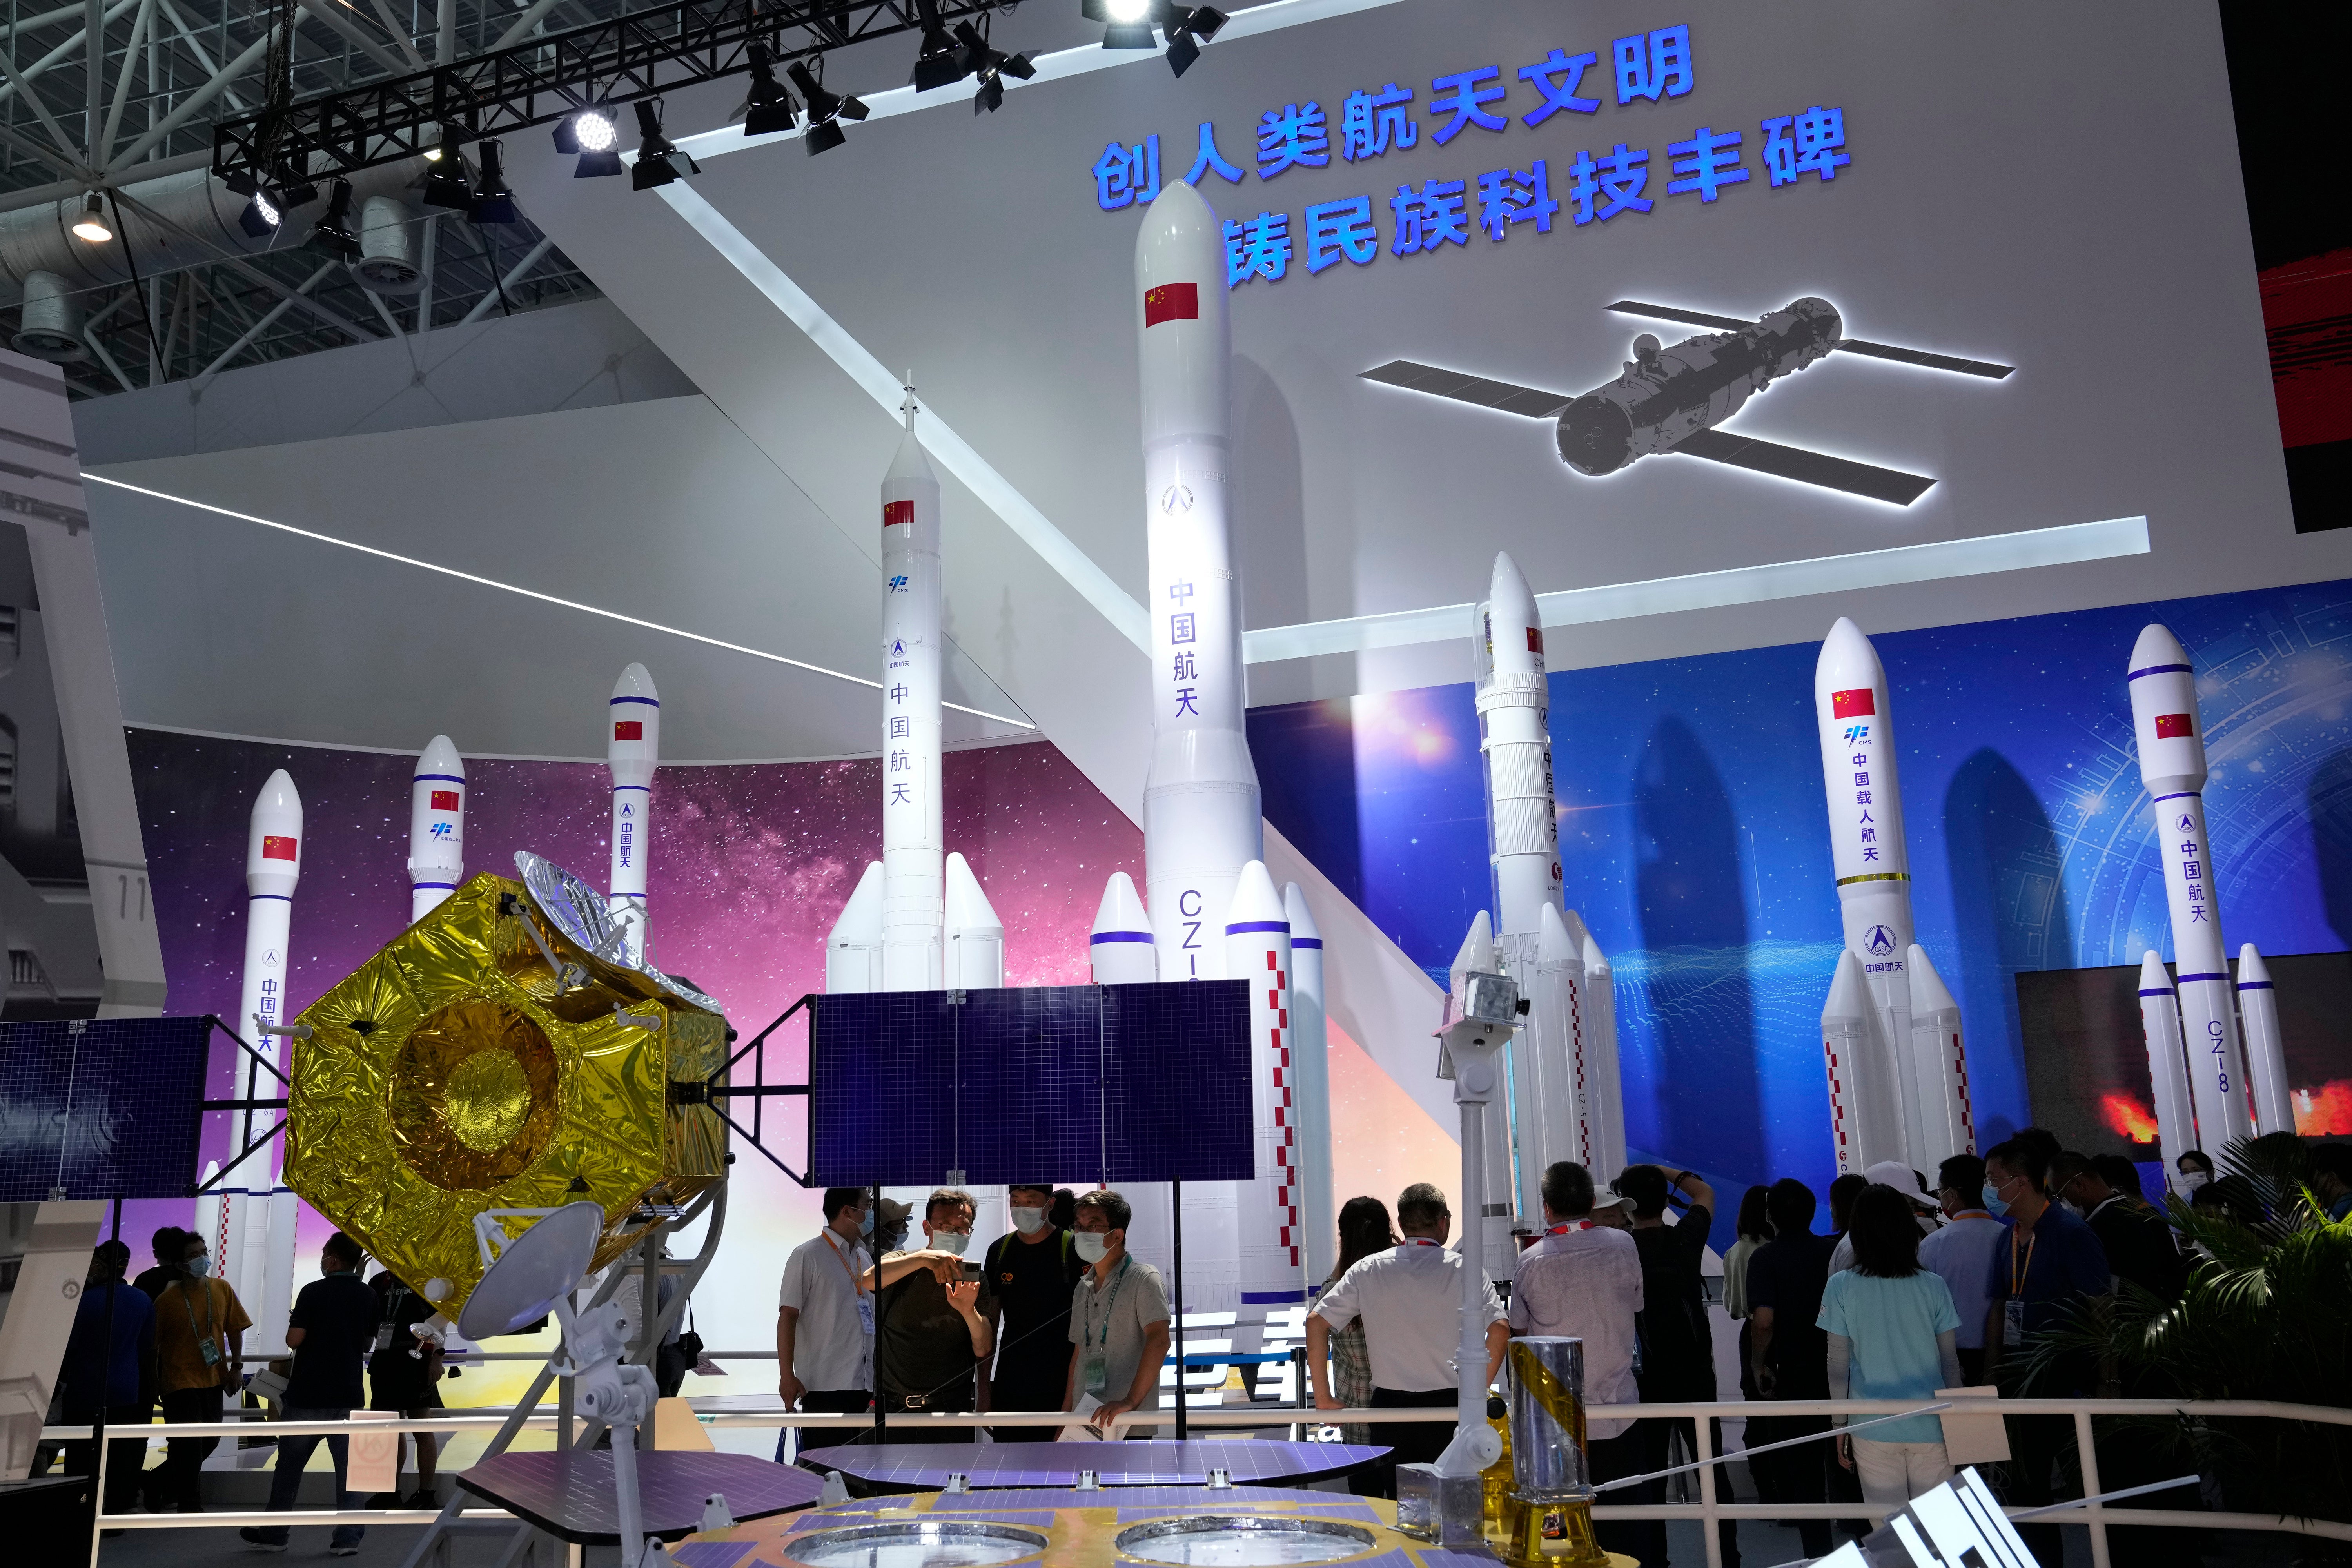 File: Visitors view replica space launch rockets including the first generation rockets for manned launch produced by China Aerospace Science and Technology Corporation at an exhibition on 29 September in Zhuhai